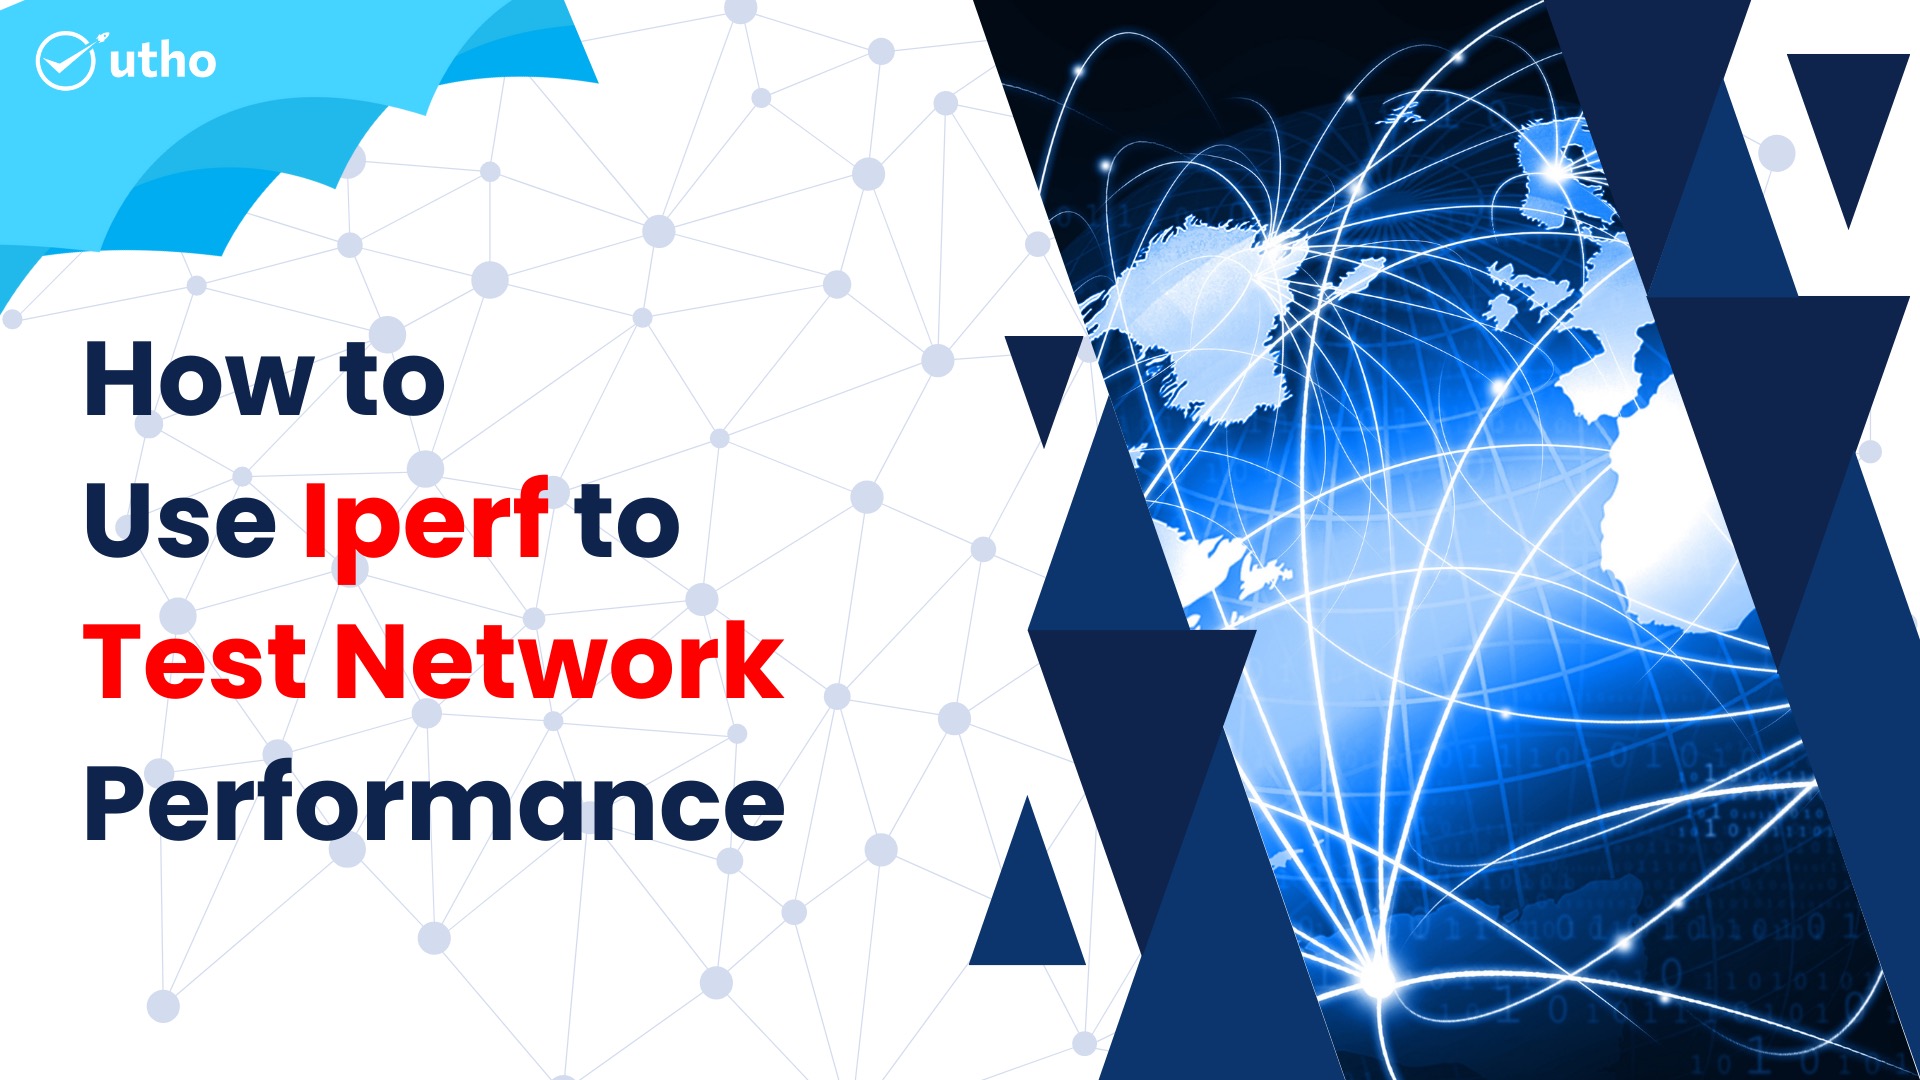 How to Use Iperf to Test Network Performance